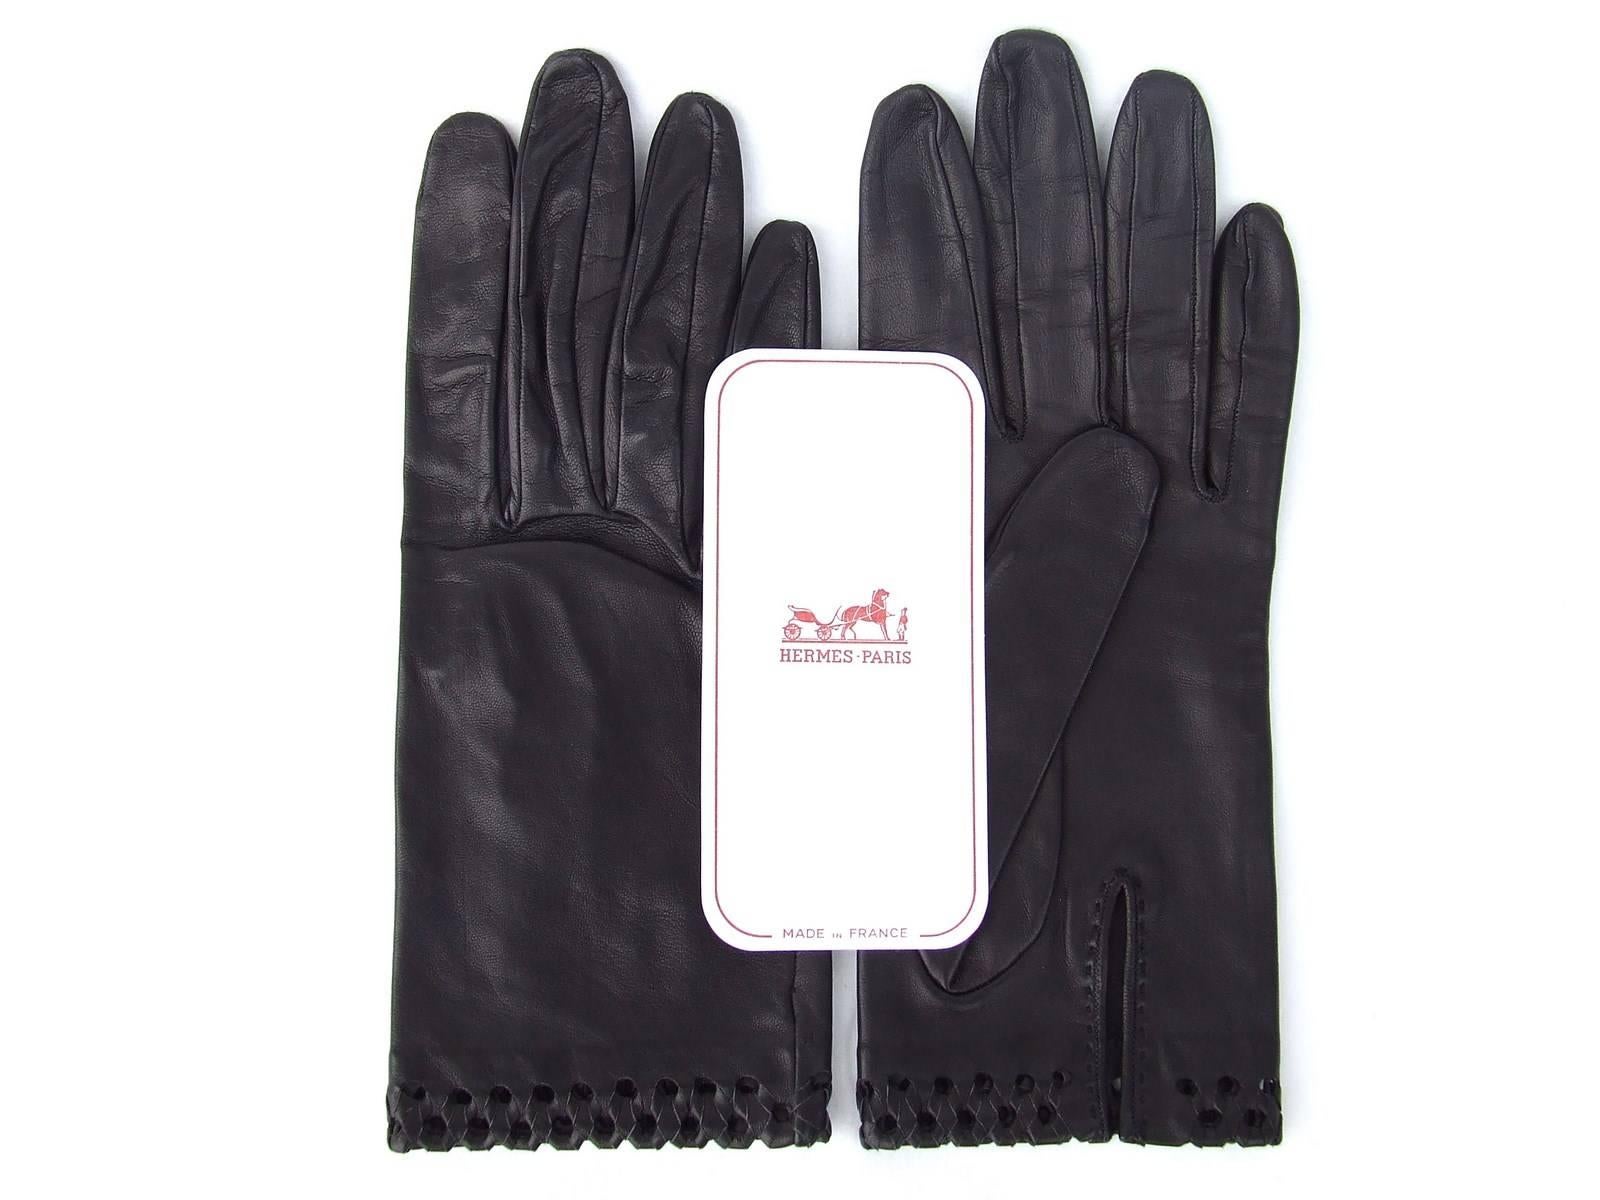 Beautiful Authentic Hermes Gloves

Made in France

Made of Smooth Leather

Colorway: Black

The leather is supple, the inside is soft and the finishes are impeccable

The tour wrist is beautifully pierced and decorated with a small